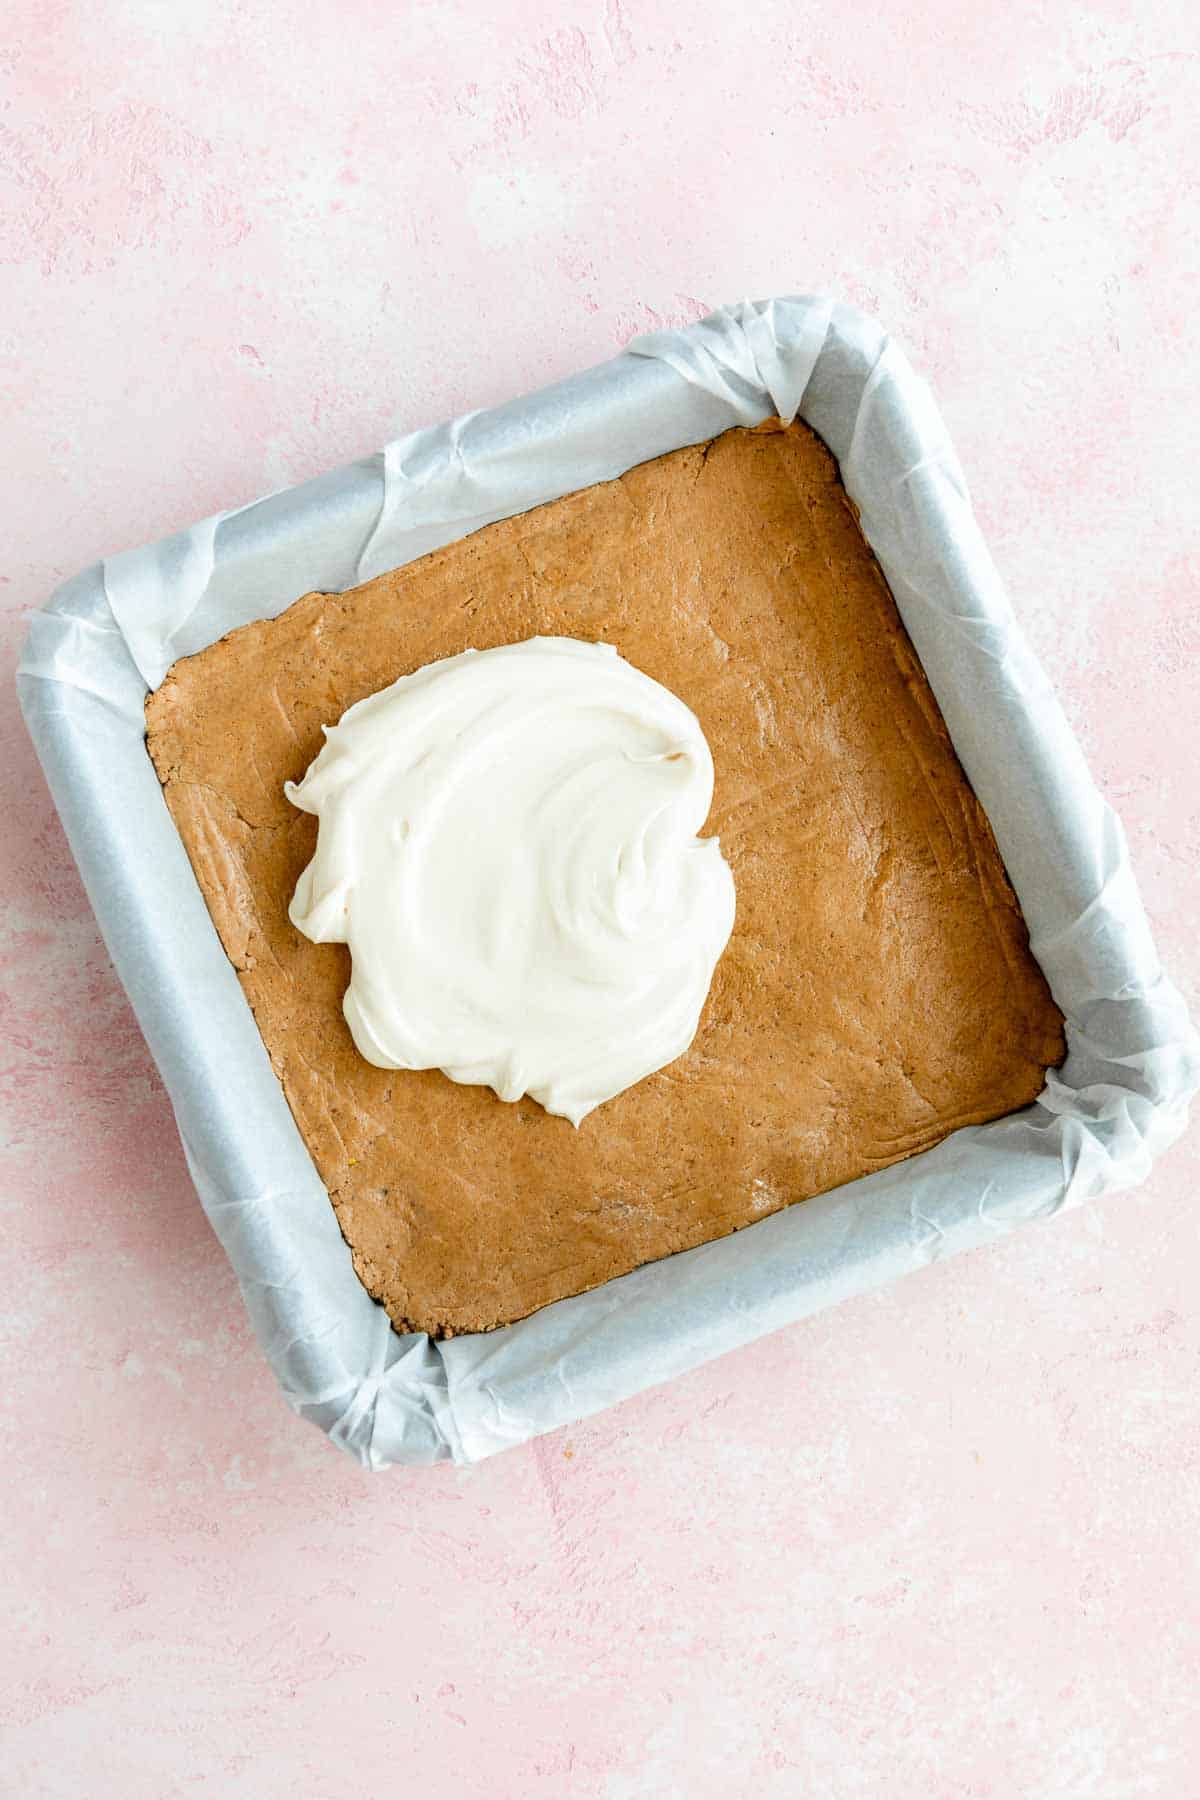 vegan protein bars dough with white chocolate on top inside a baking dish